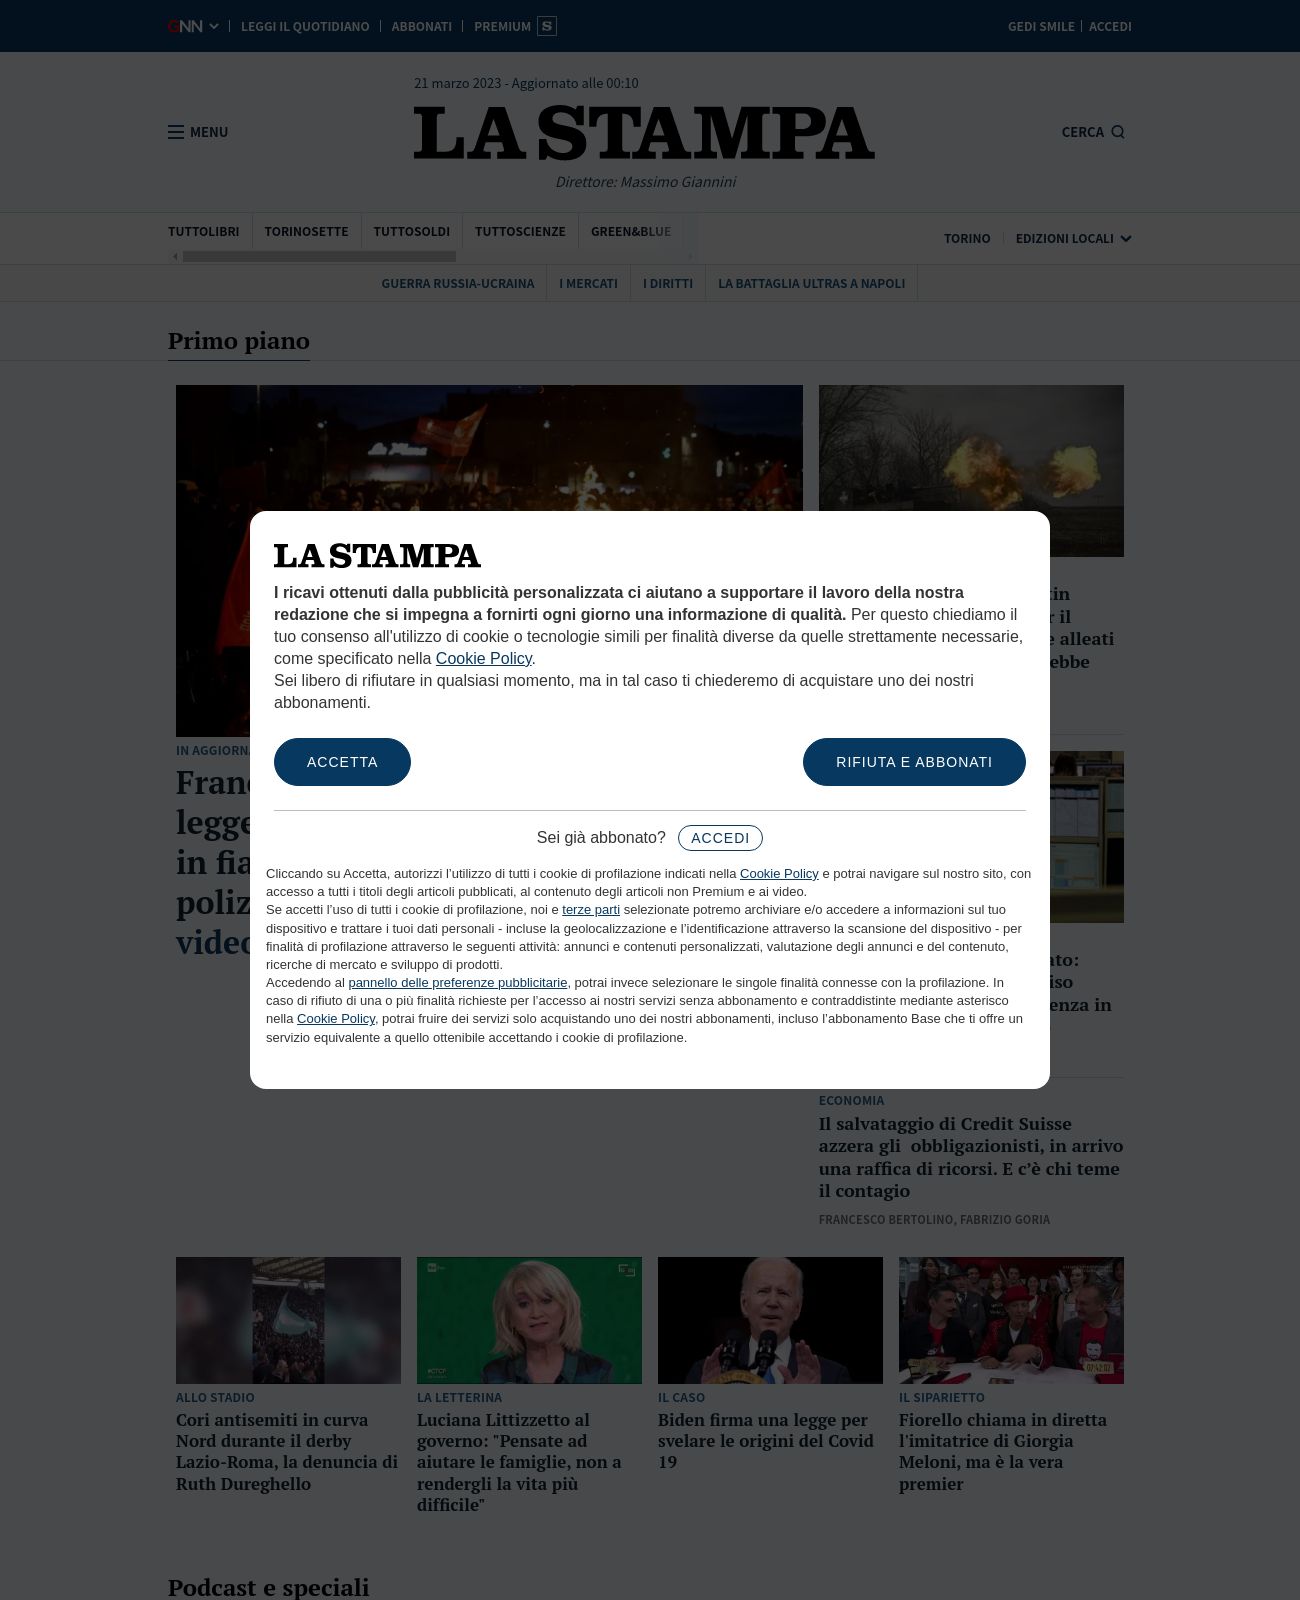 La Stampa at 2023-03-21 00:23:30+01:00 local time